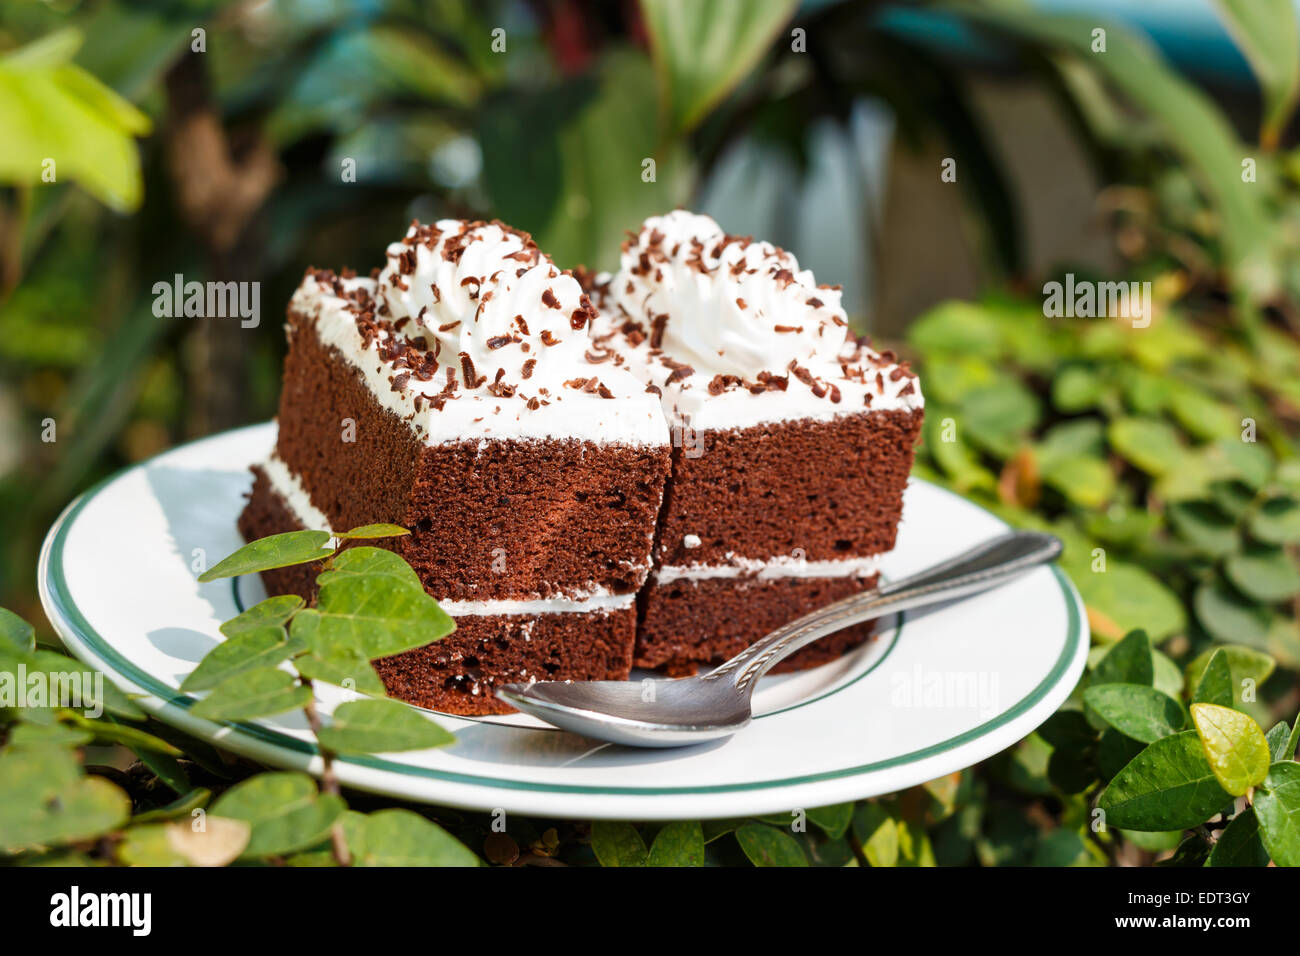 chocolate cakes with white cream on top and spoon on plate in garden Stock Photo